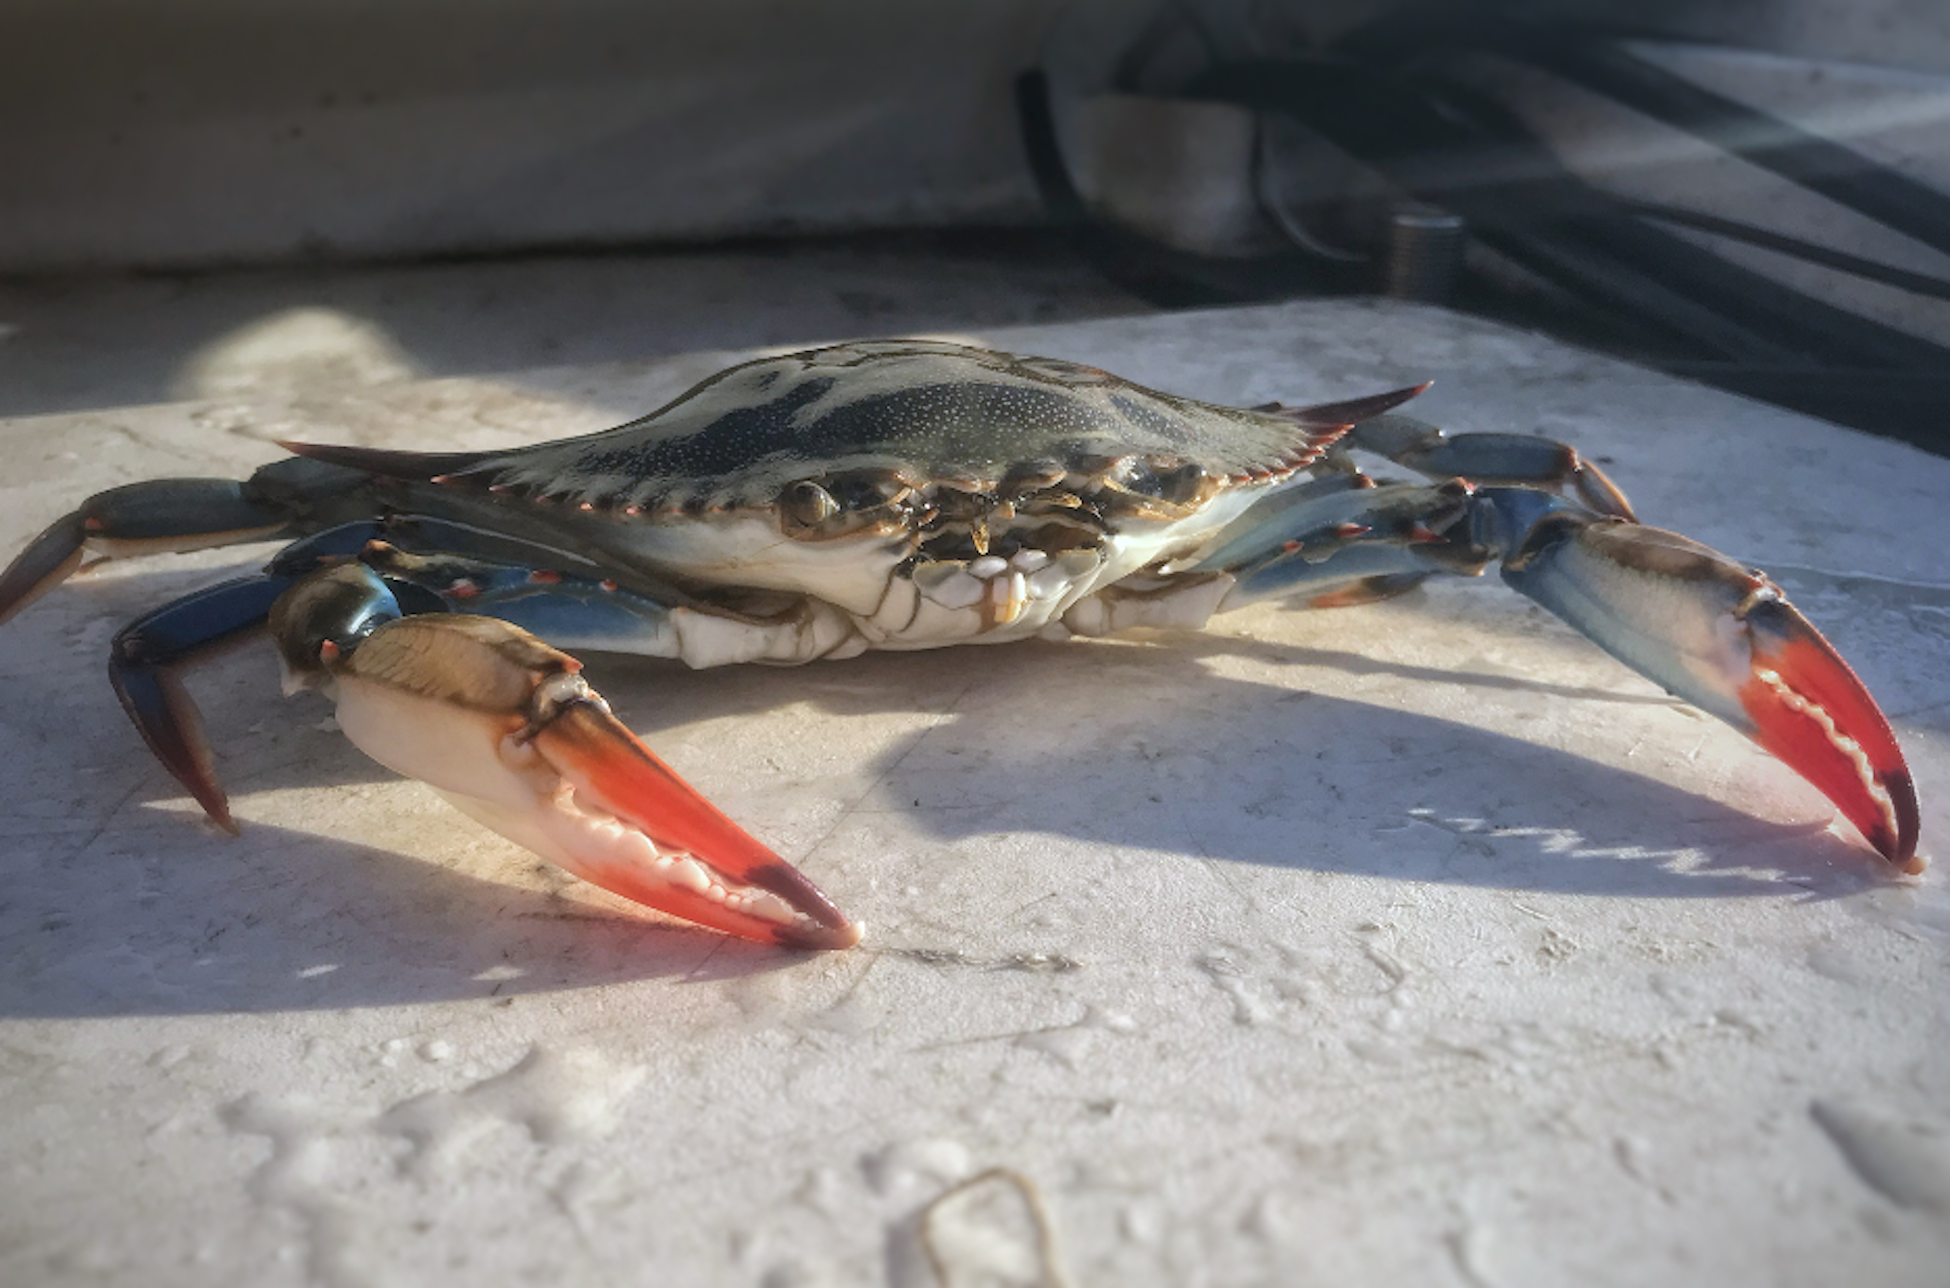 Adult female blue crab, in comparison with the adult male blue crab in the opening photo.